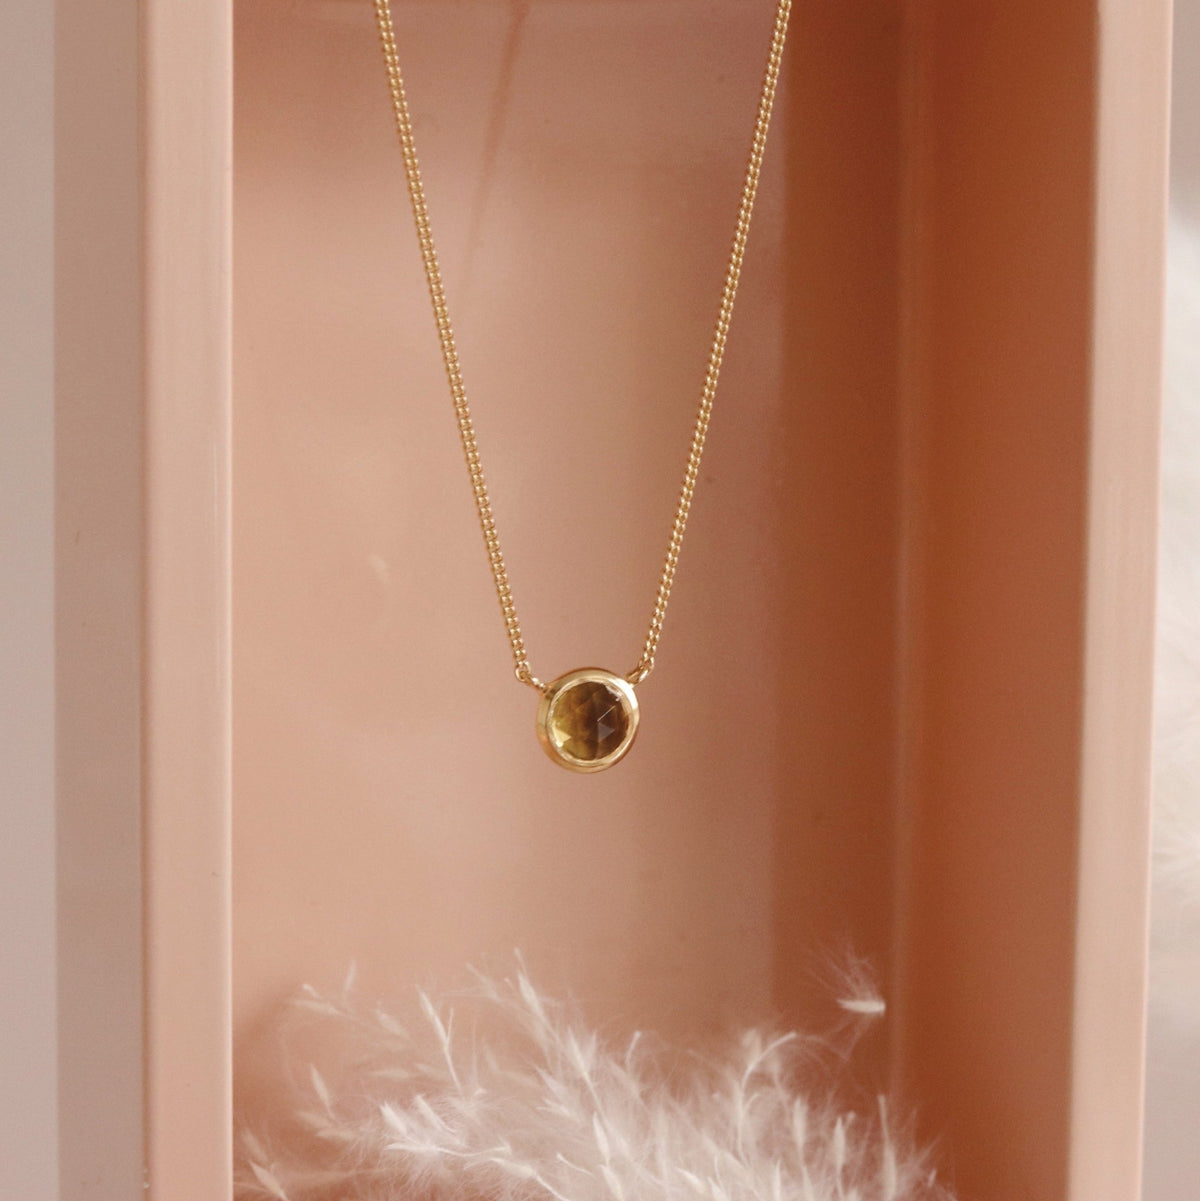 DAINTY LEGACY NECKLACE - CITRINE &amp; GOLD - SO PRETTY CARA COTTER